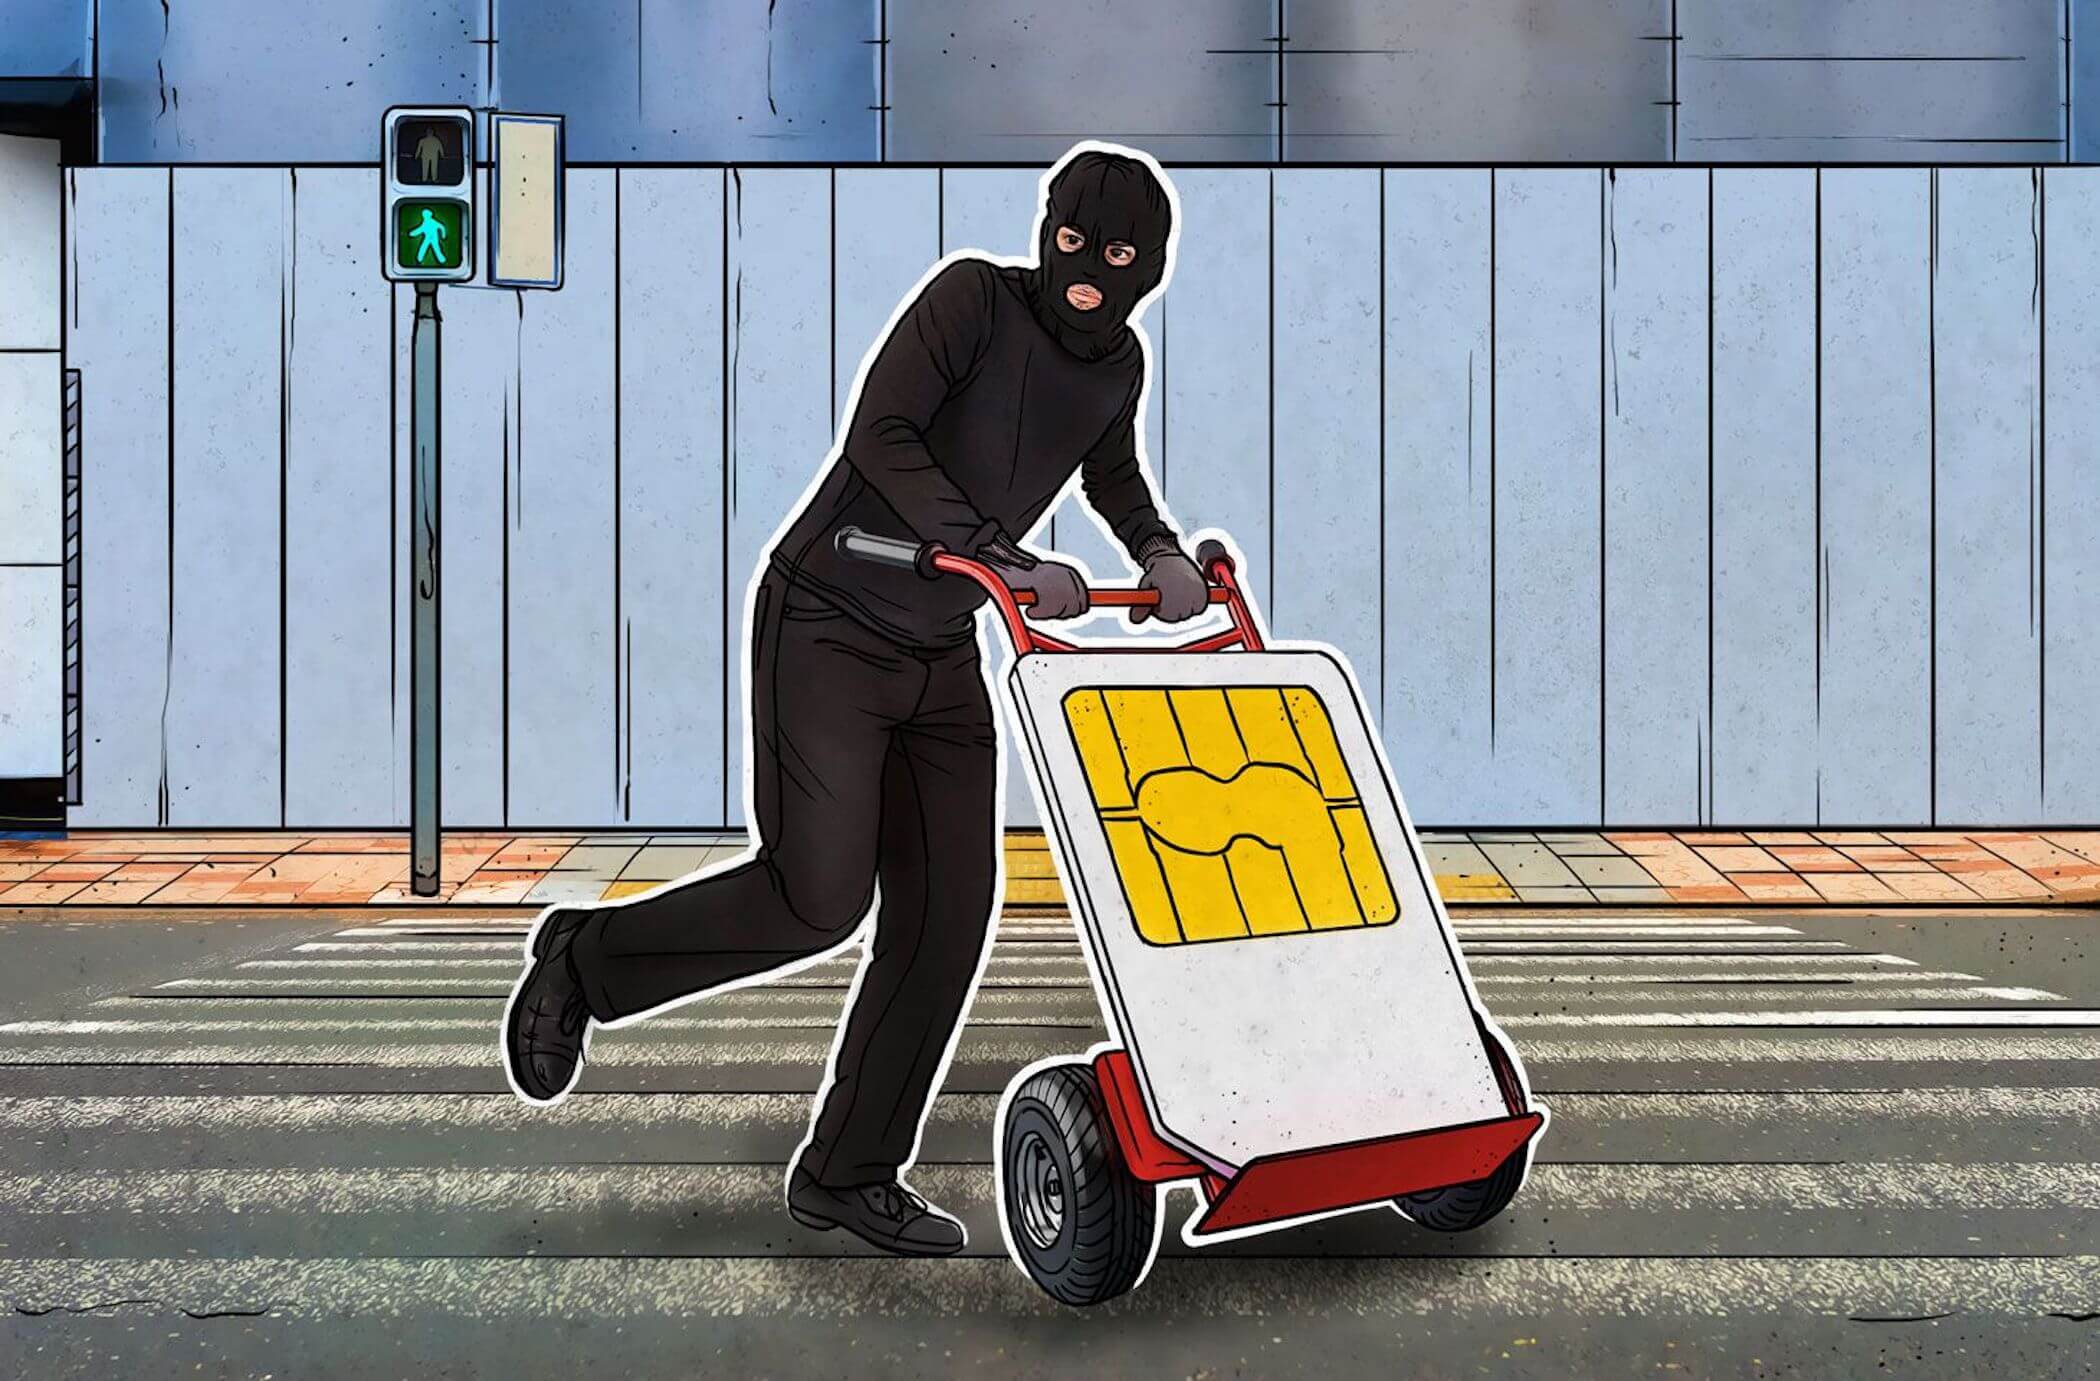 Princeton study: US carriers do little to protect customers from SIM-swap attacks